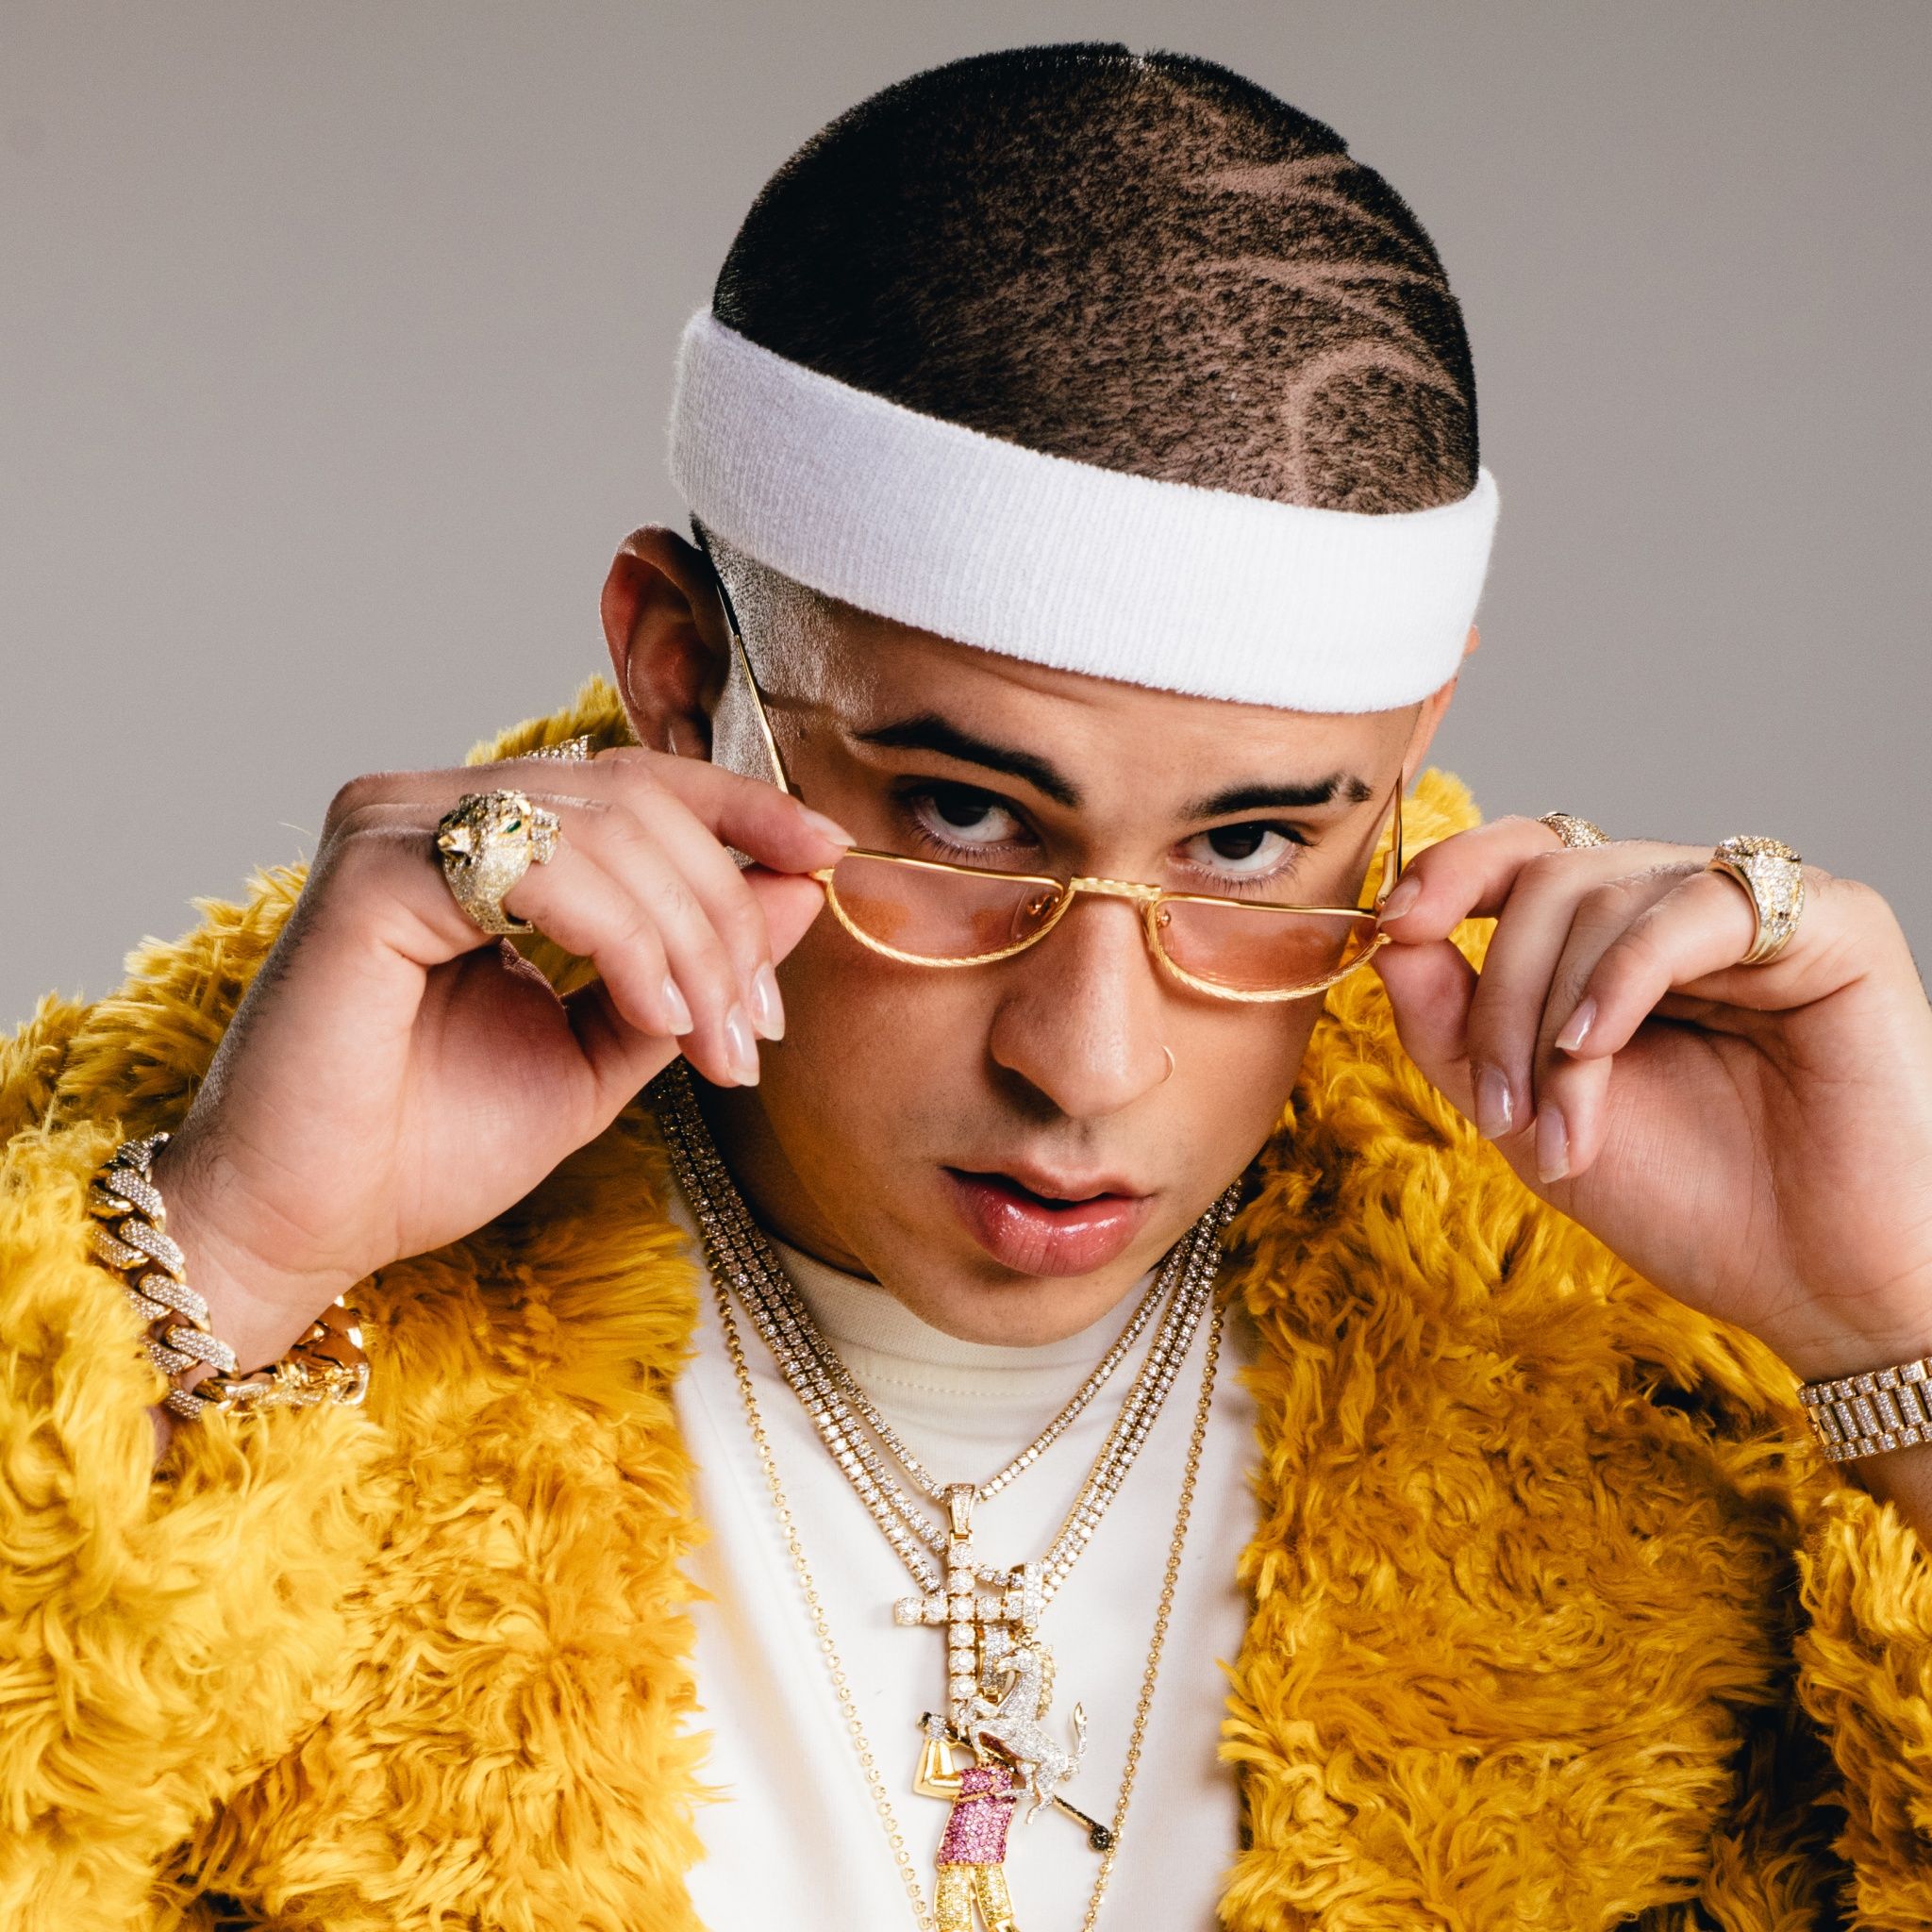 A man wearing sunglasses and yellow clothing - Bad Bunny